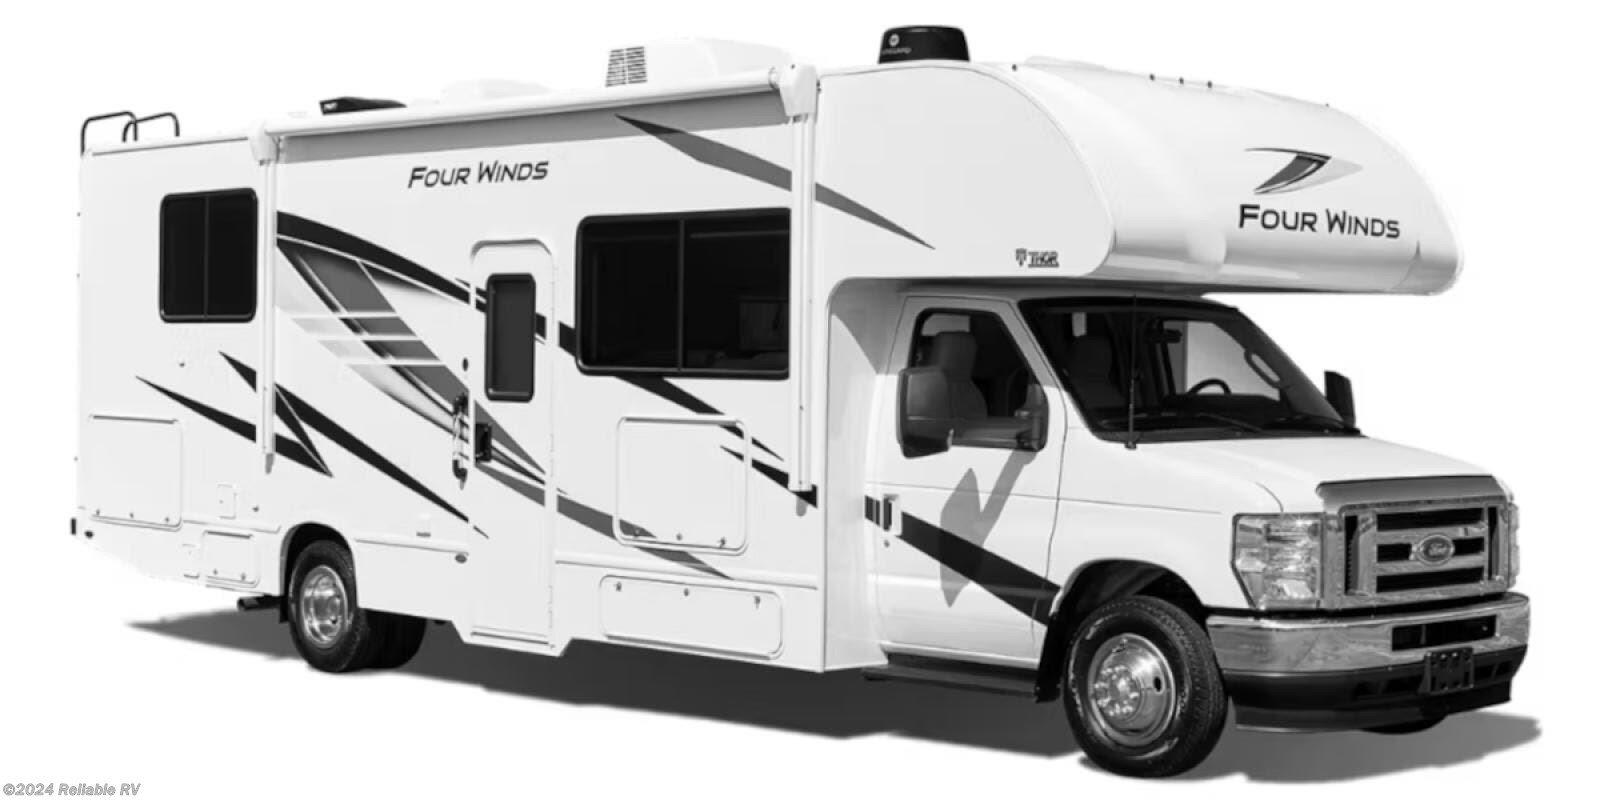 2024 Thor Four Winds C 350 Ford 22E RV for Sale in Springfield, MO